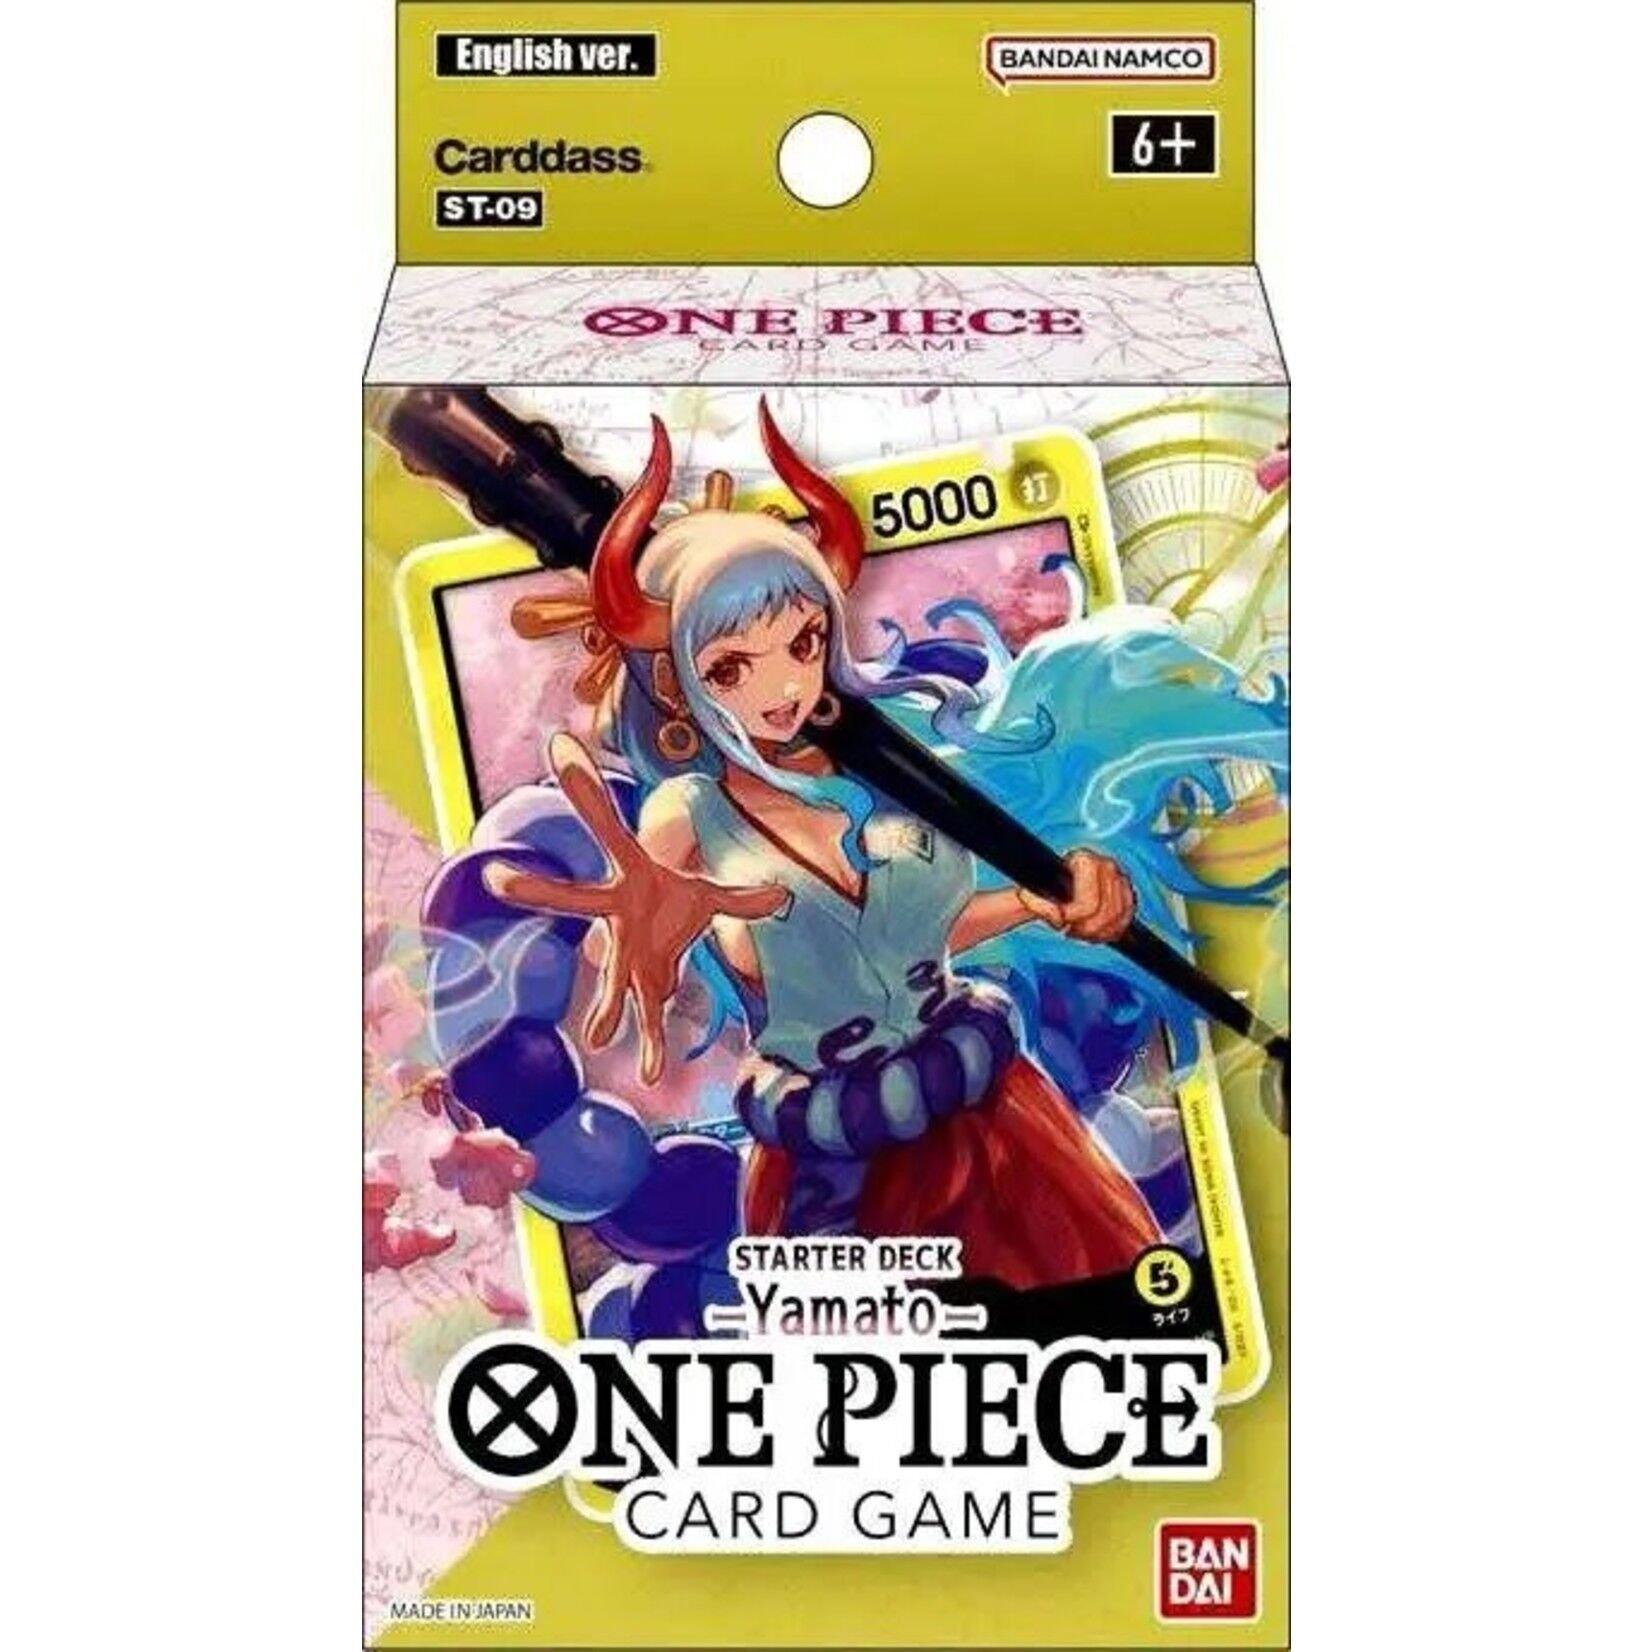 Bandai  Trading Cards - Deck - One Piece - Starter Deck - Yamato - ST-09 